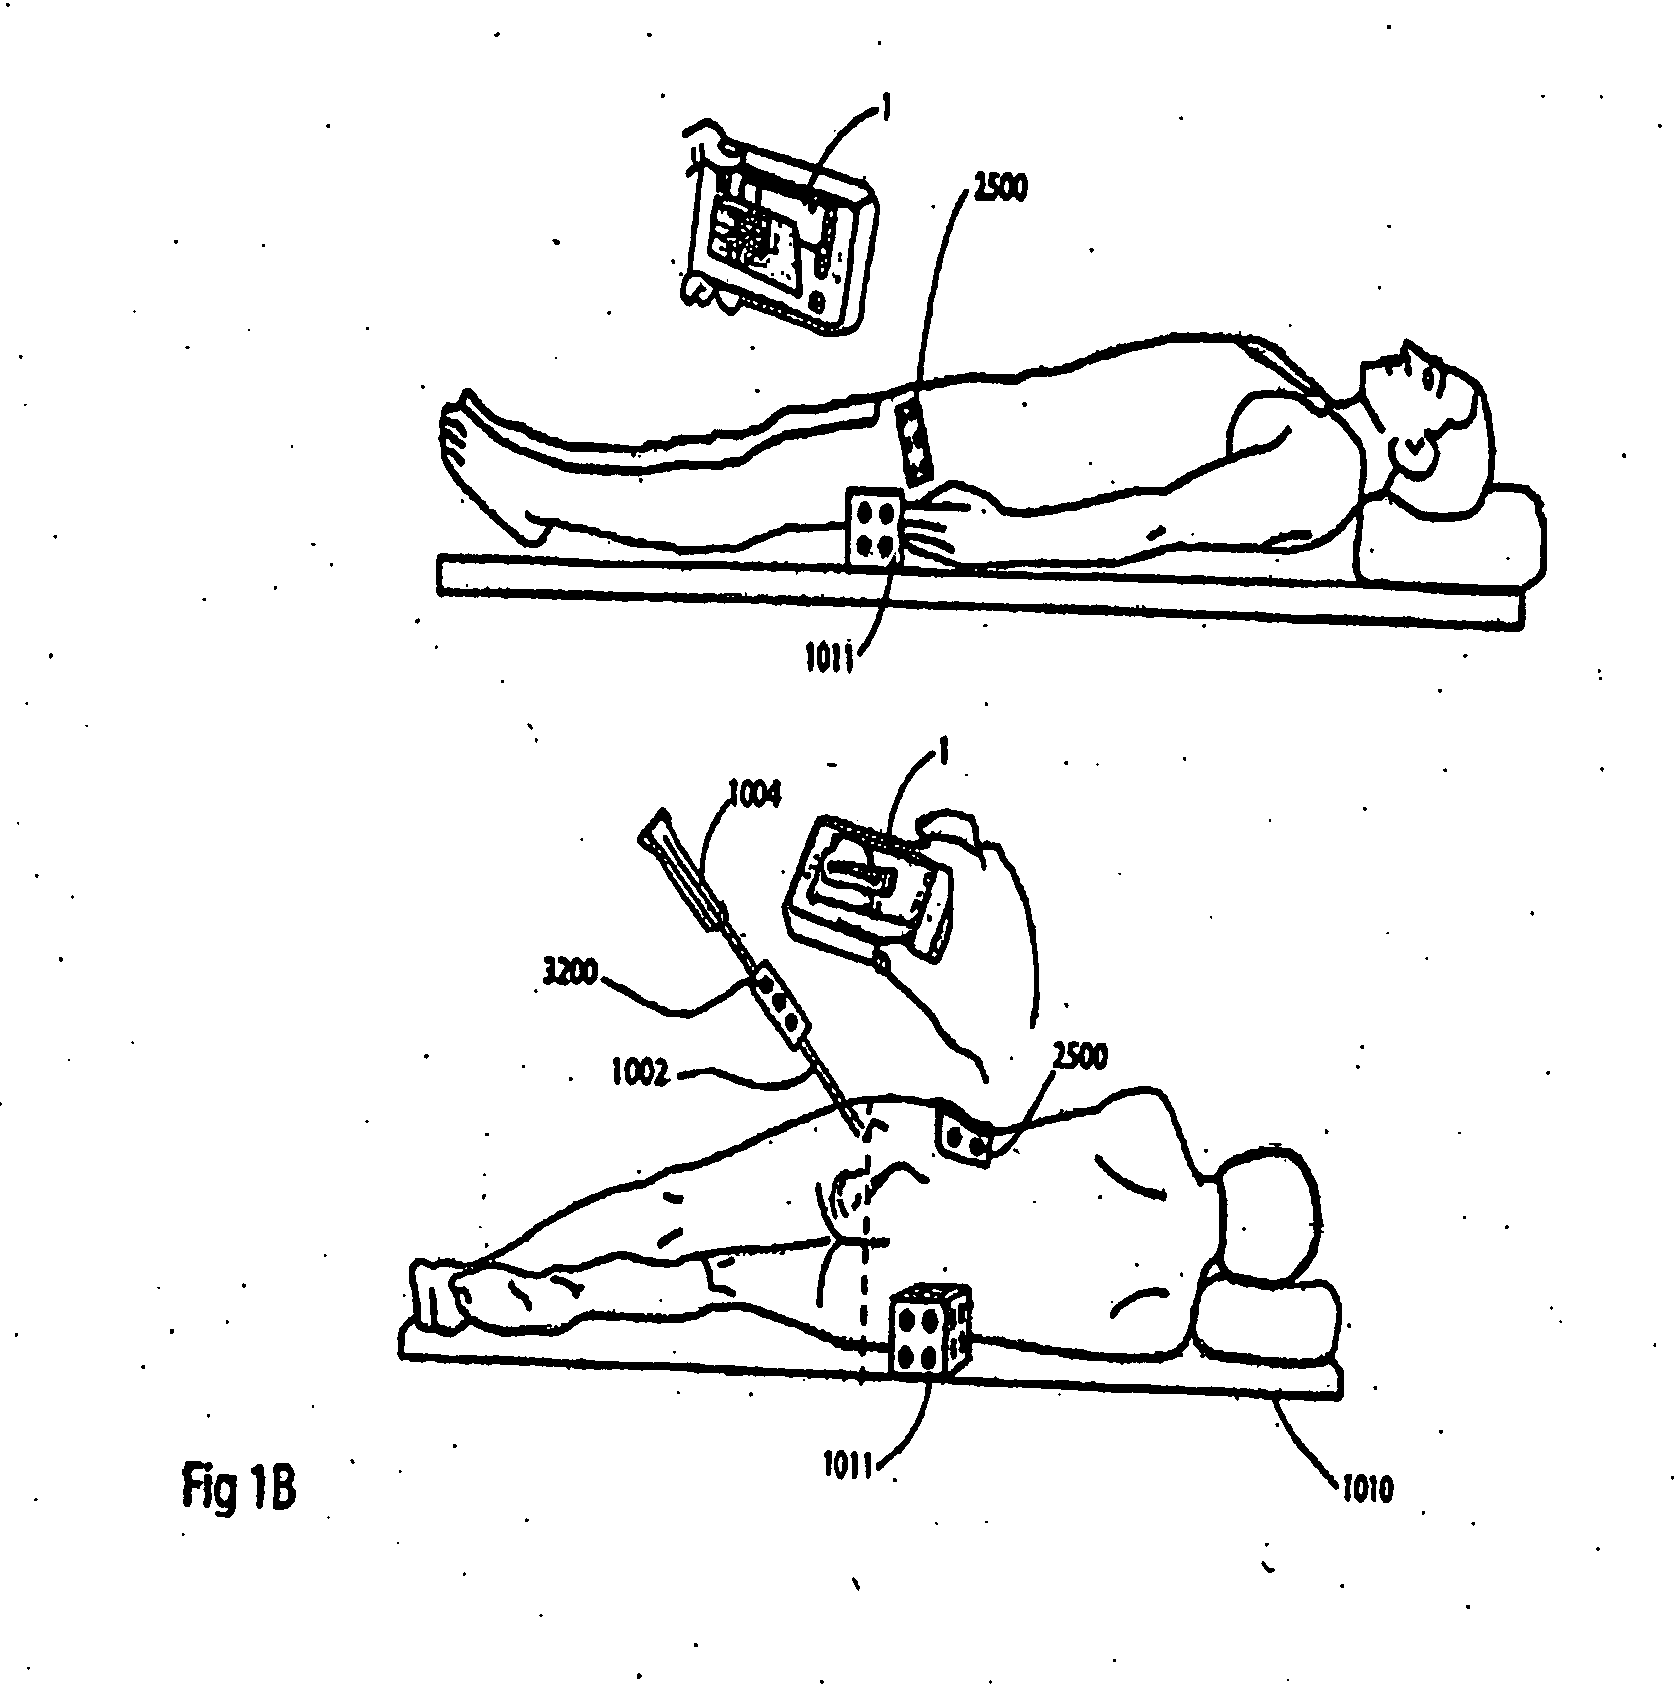 Handheld tracking system and devices for aligning implant systems during surgery